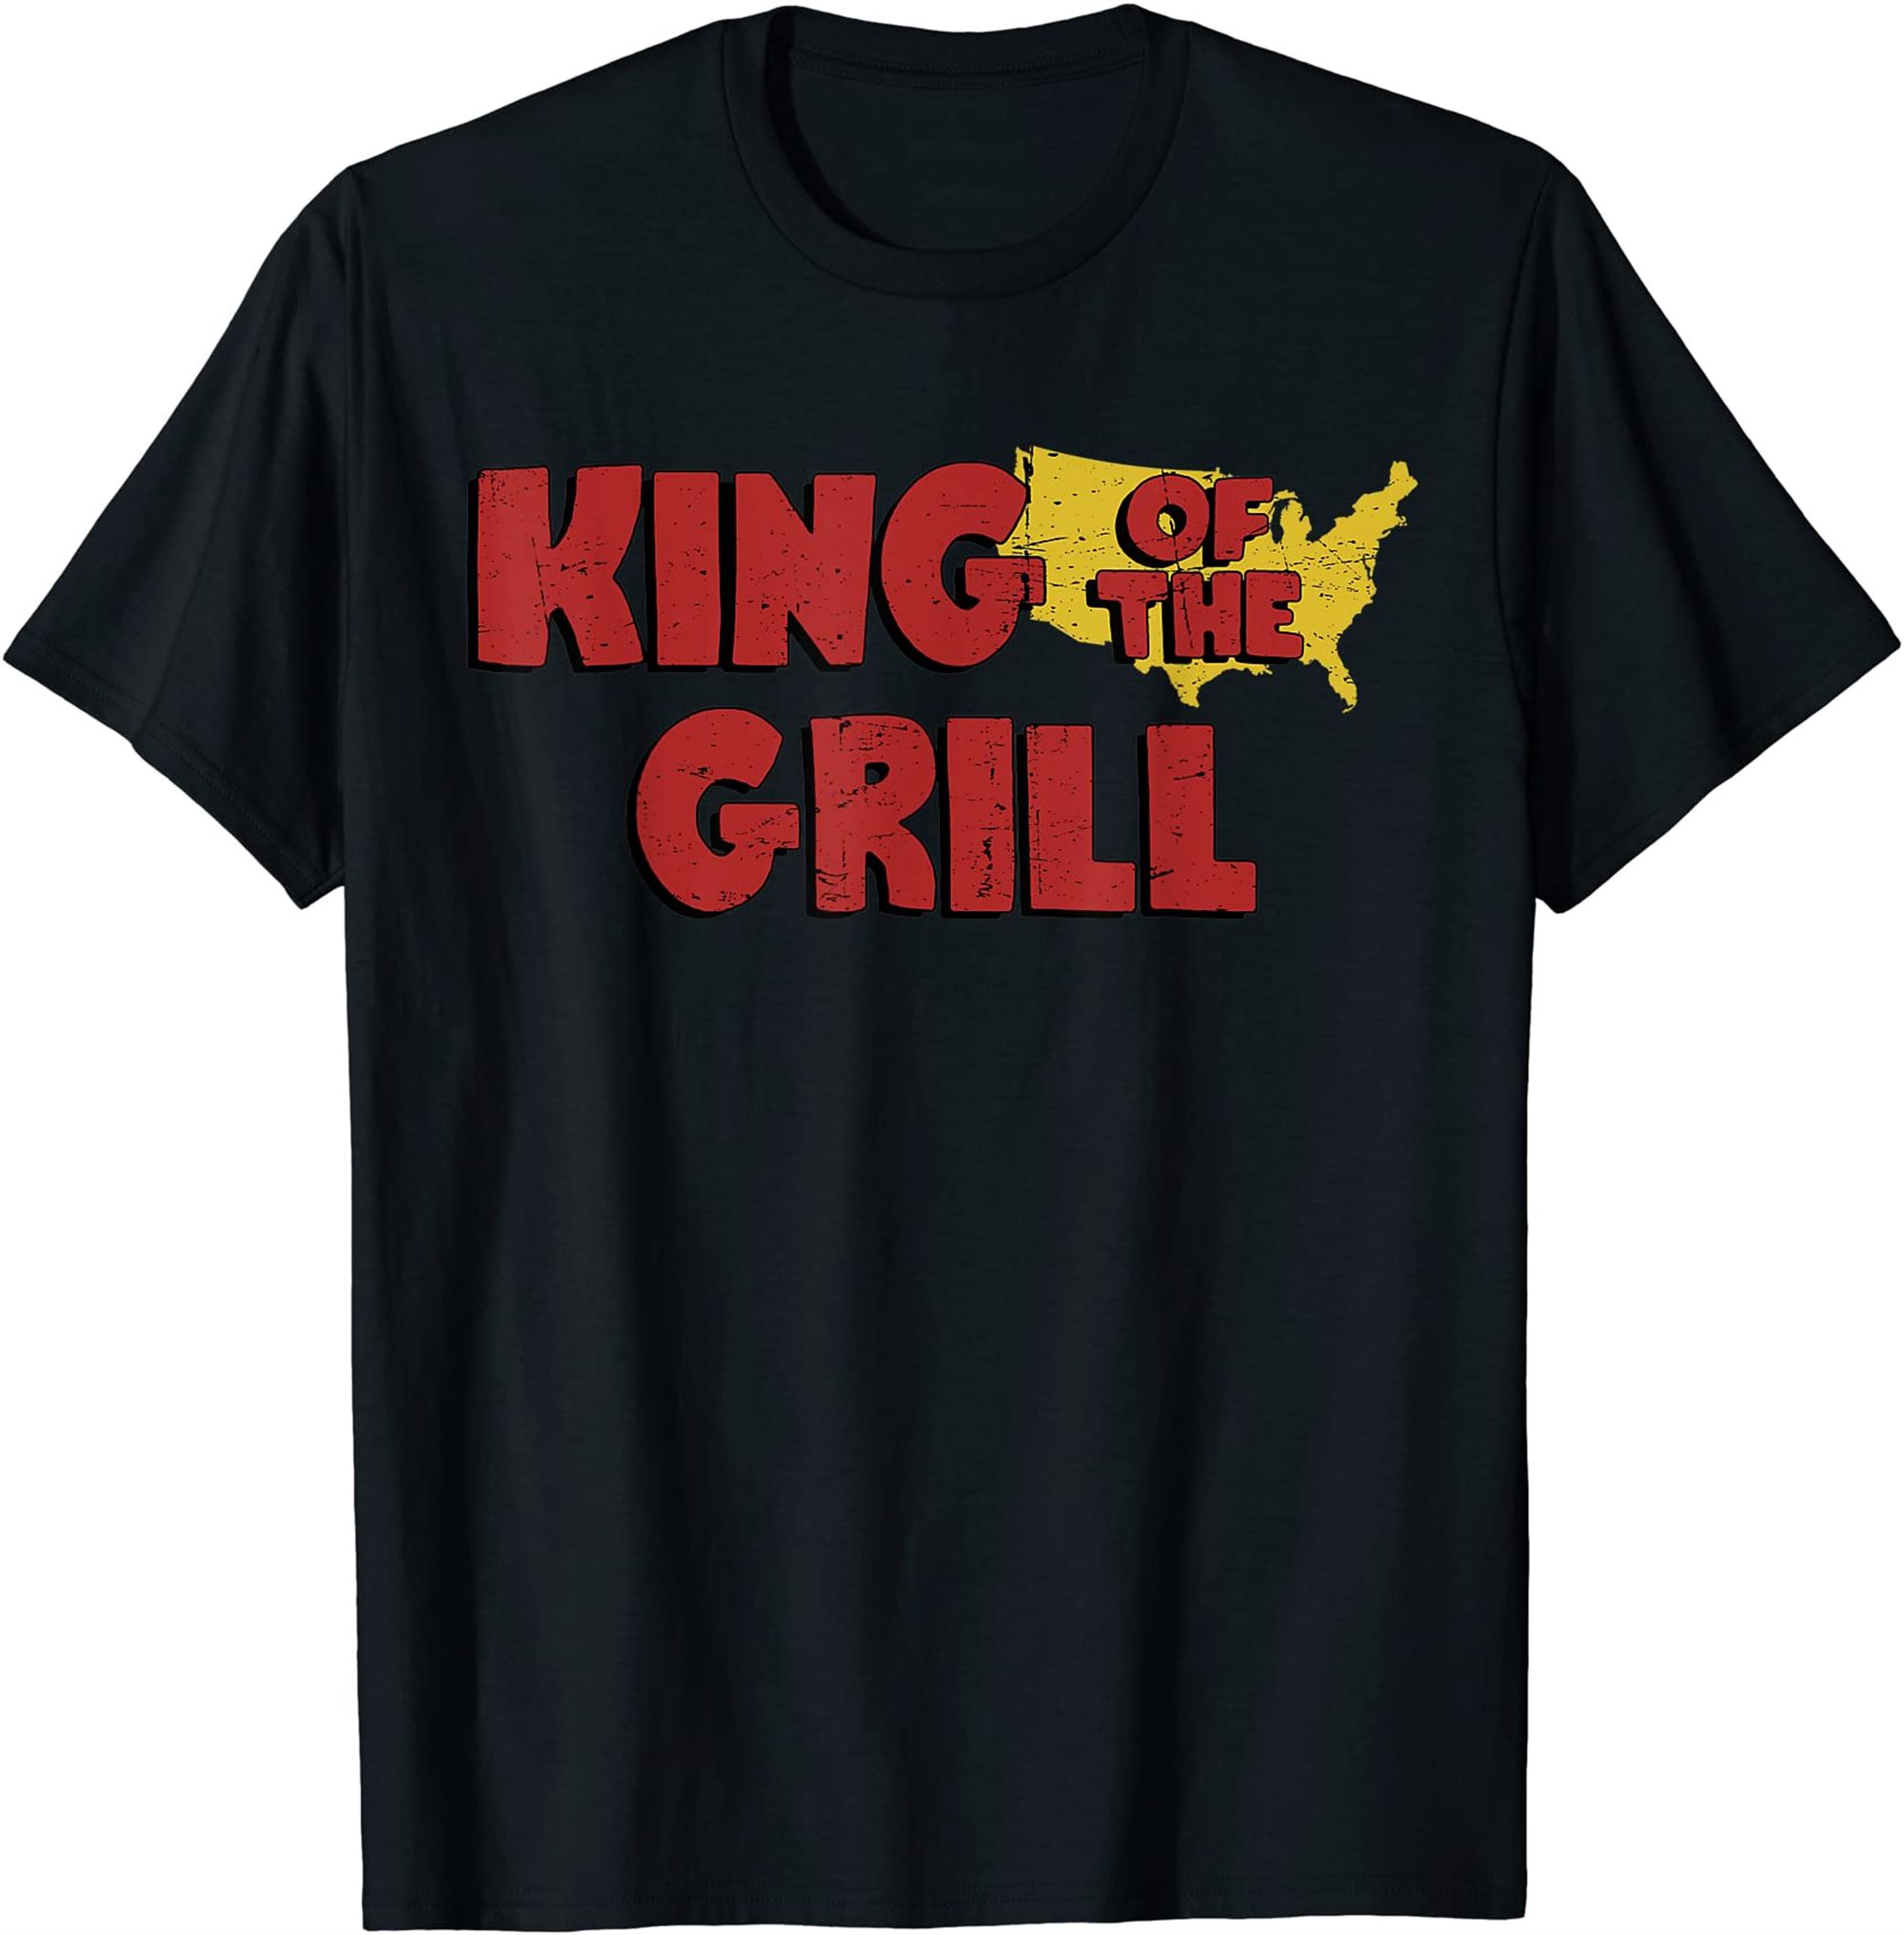 King Of The Grill Vintage T-shirt Plus Size Up To 5xl